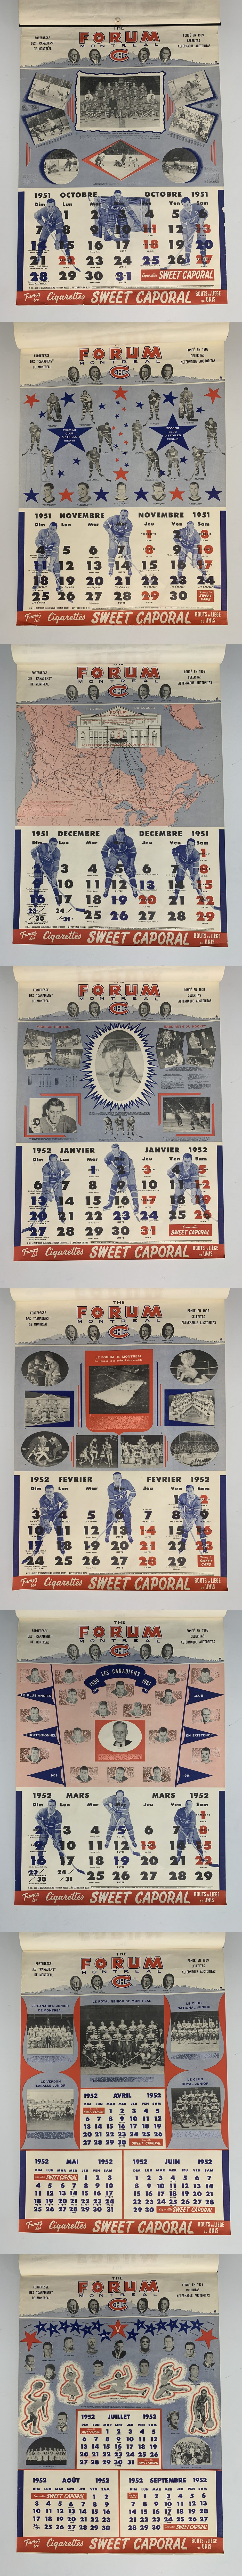 1951-52 SWEET CAPORAL MONTREAL CANADIENS FULL CALENDAR photo